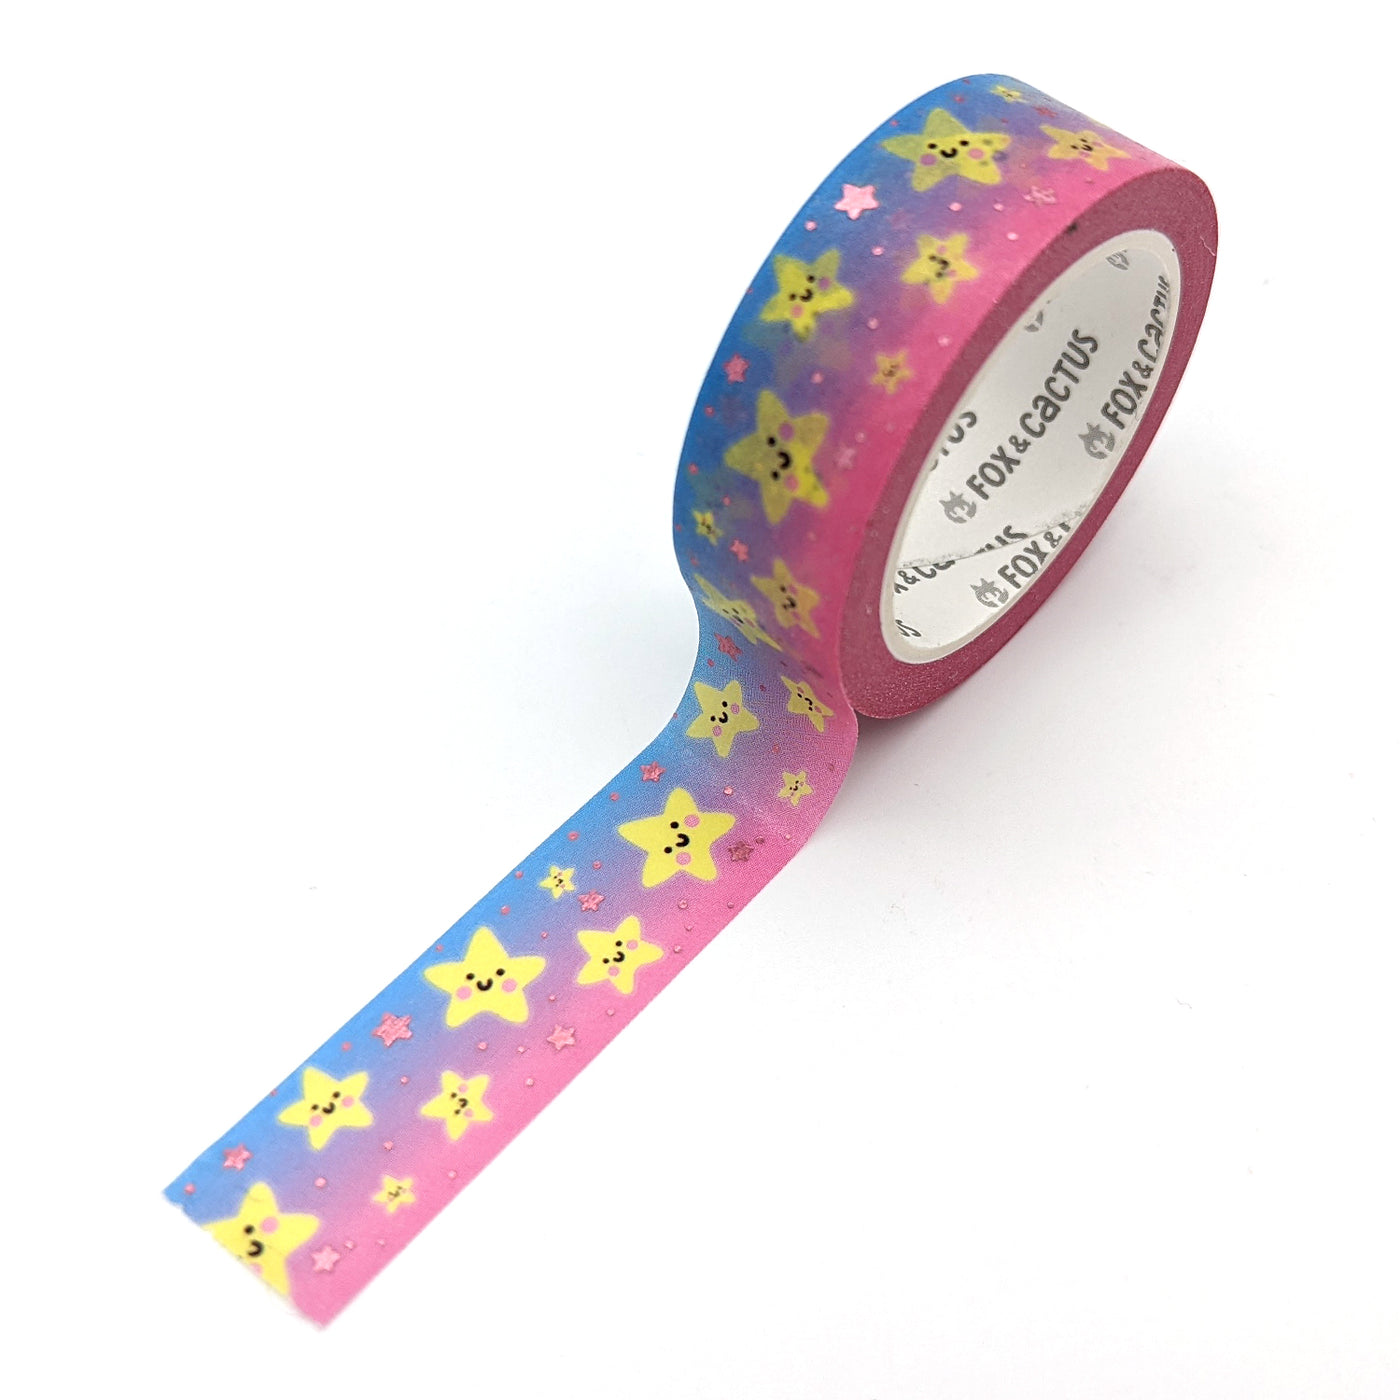 Kawaii Star Washi Tape (Pink Foil) by Fox and Cactus